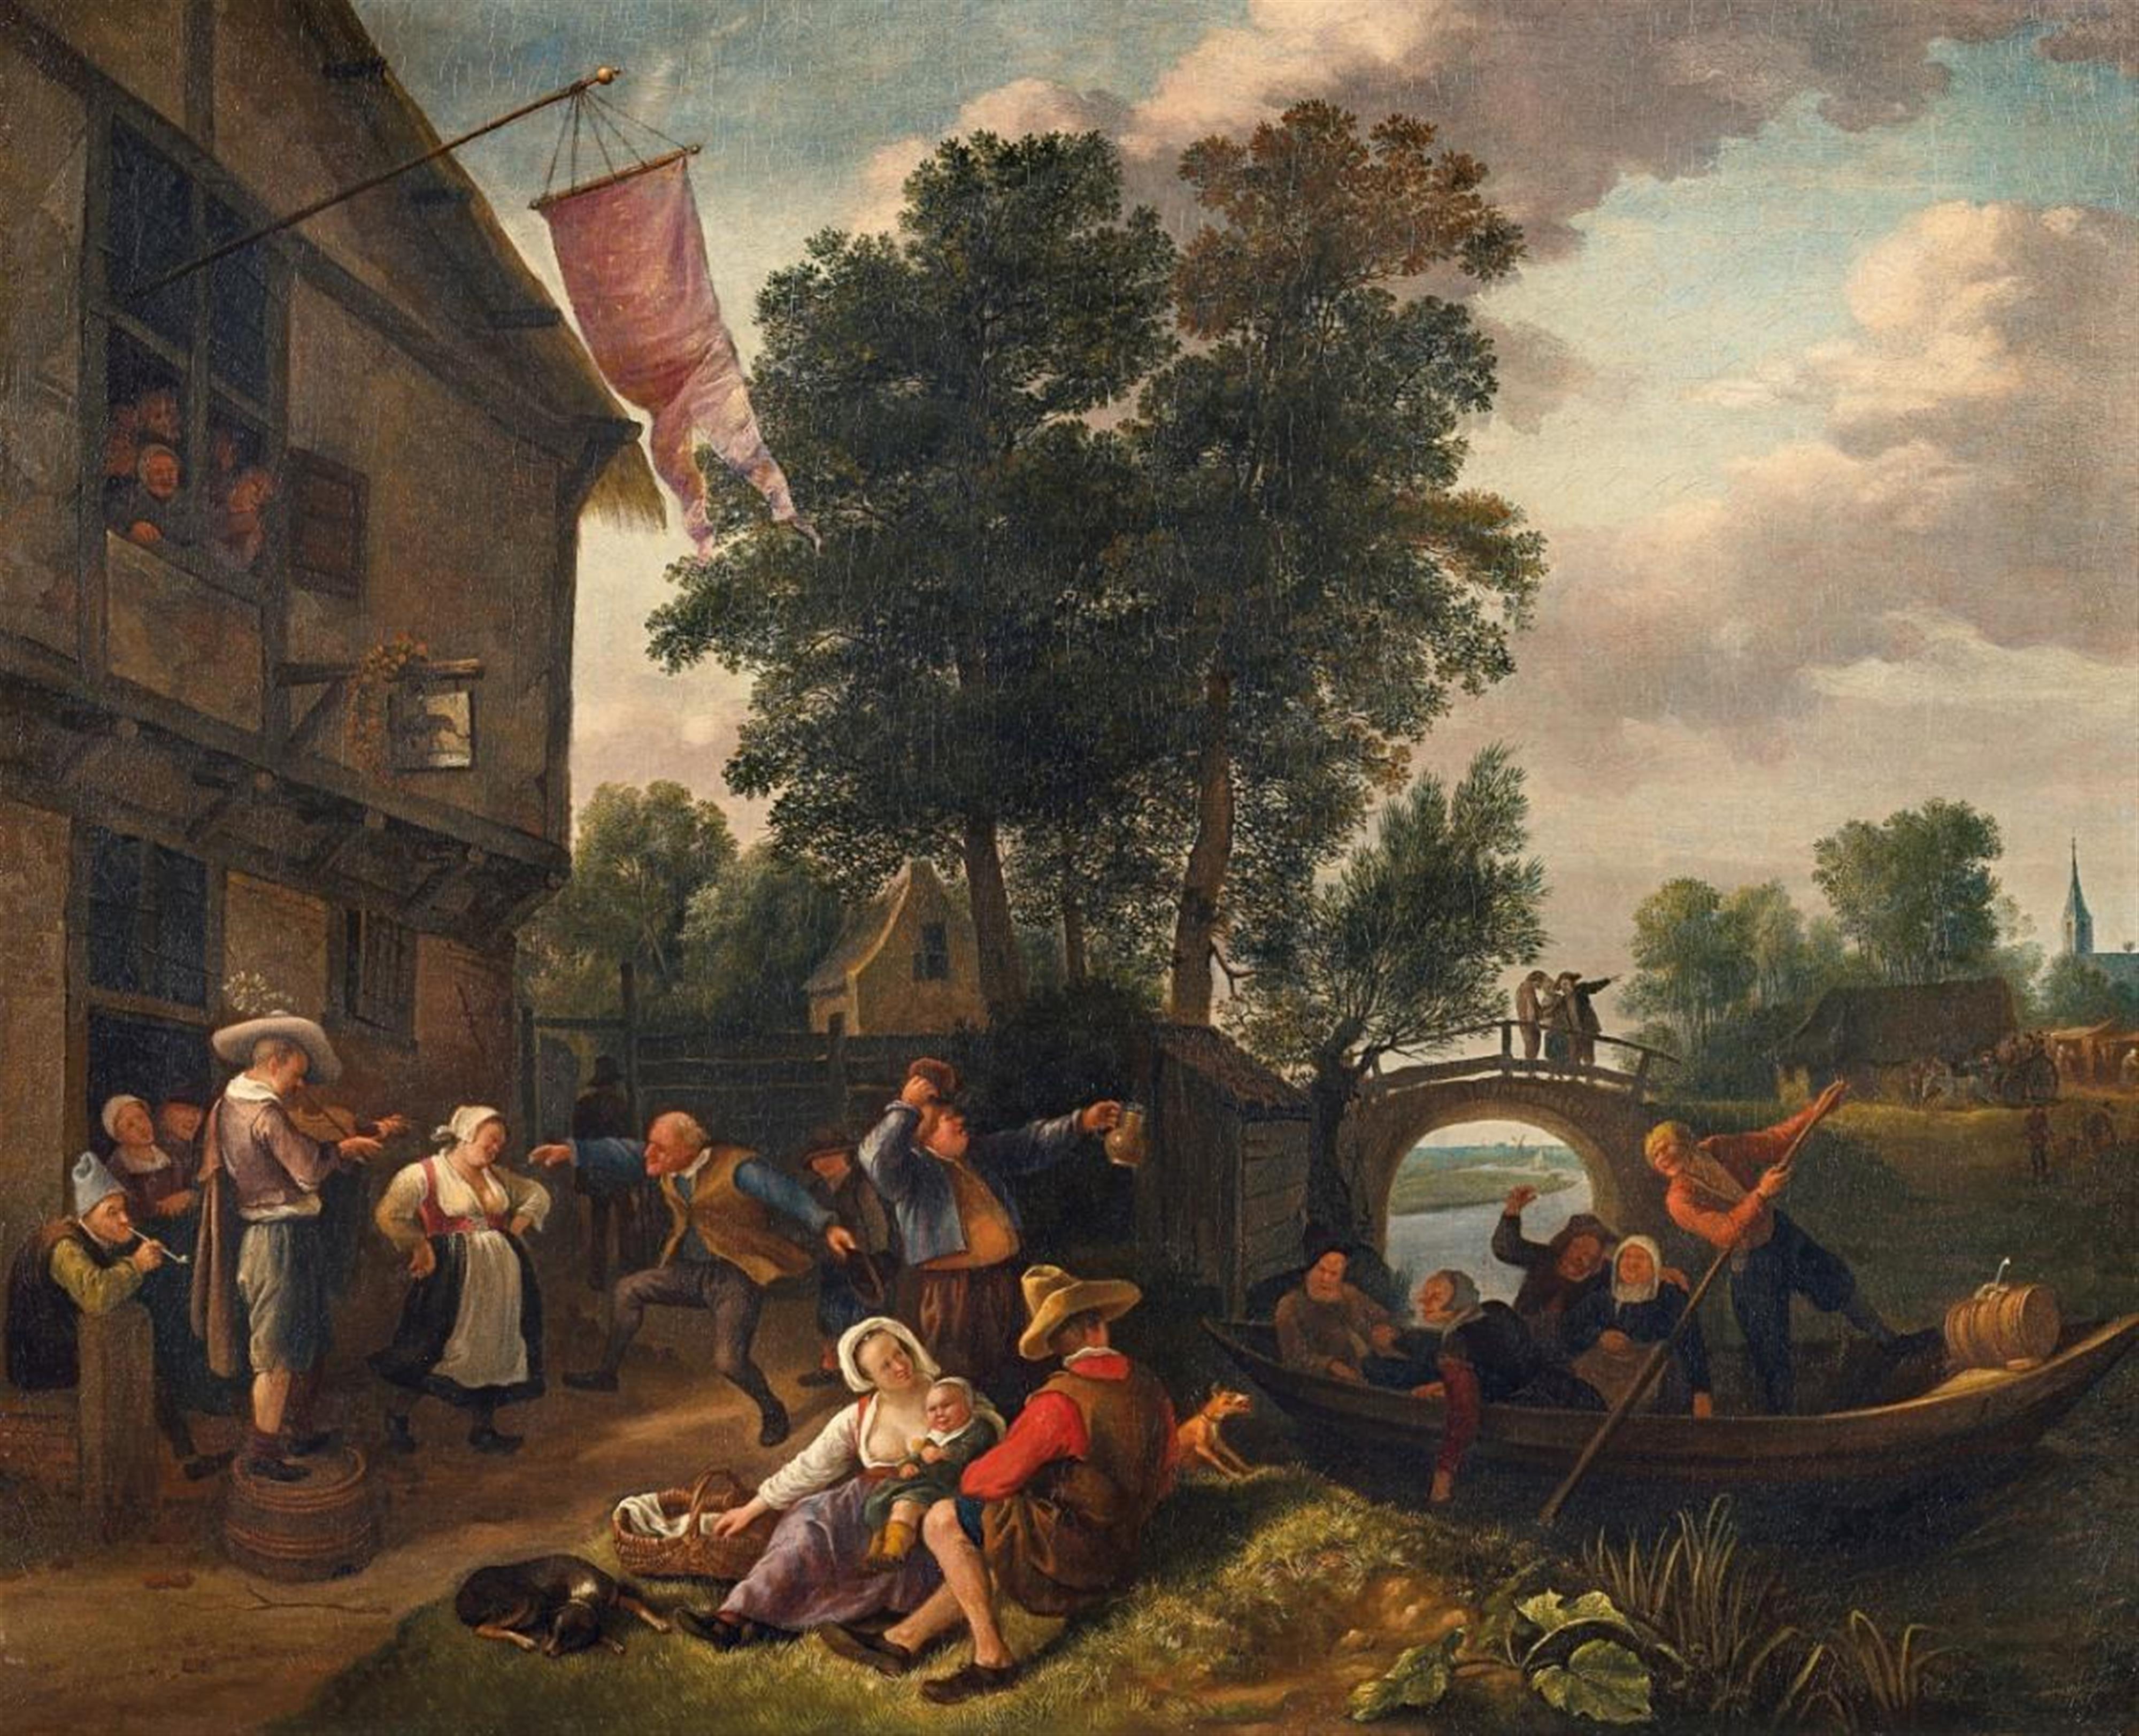 Jan Steen - PEASANTS MAKING MERRY IN FRONT OF A TAVERN